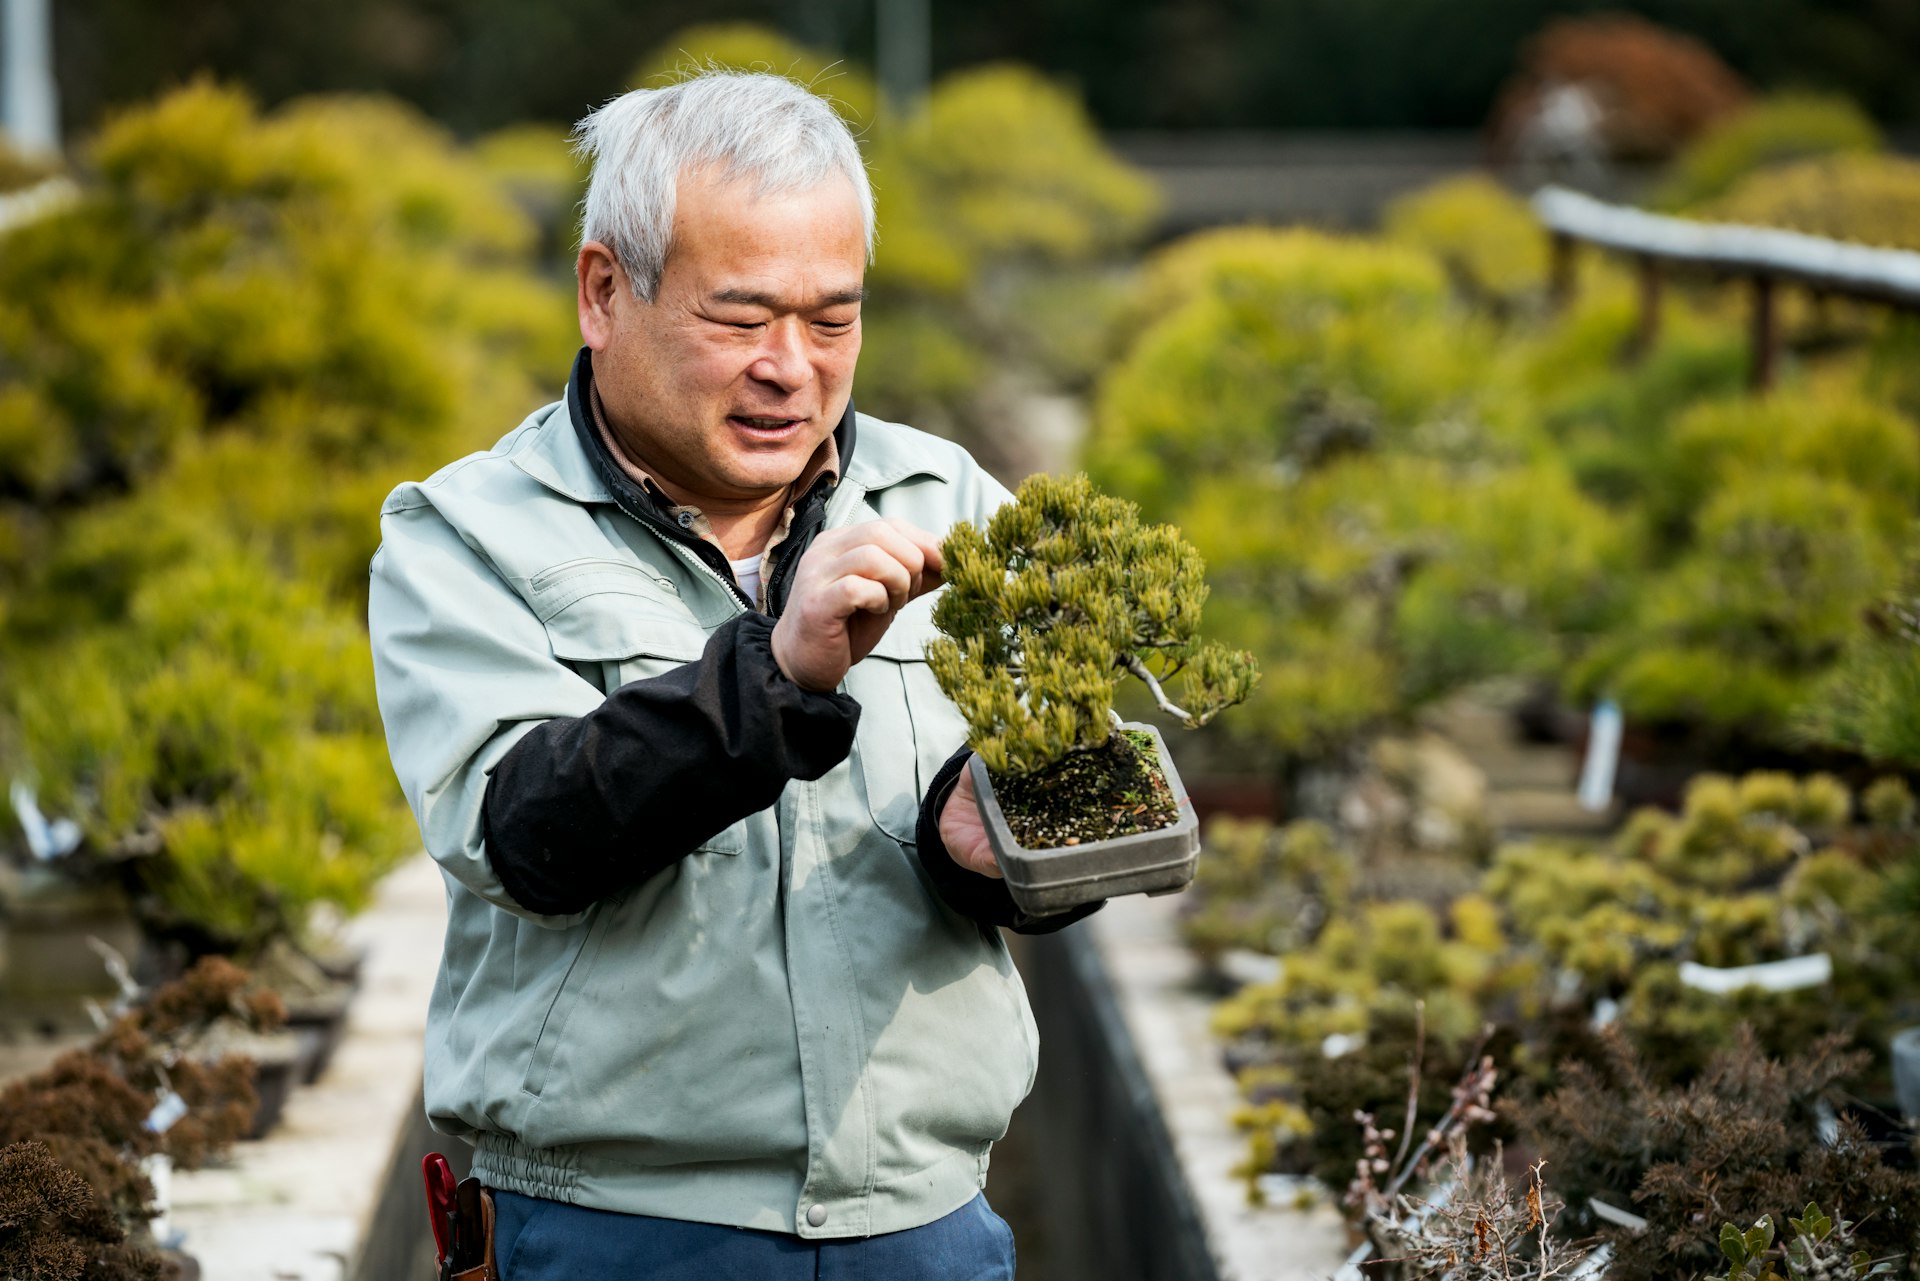 A man with grey hair looks down at a bonsai he is holding in his left hand as he adjusts a branch. He is wearing black long sleeves and a greyish blue button down shirt. Behind him are rows and rows of other bonsai softly out of focus